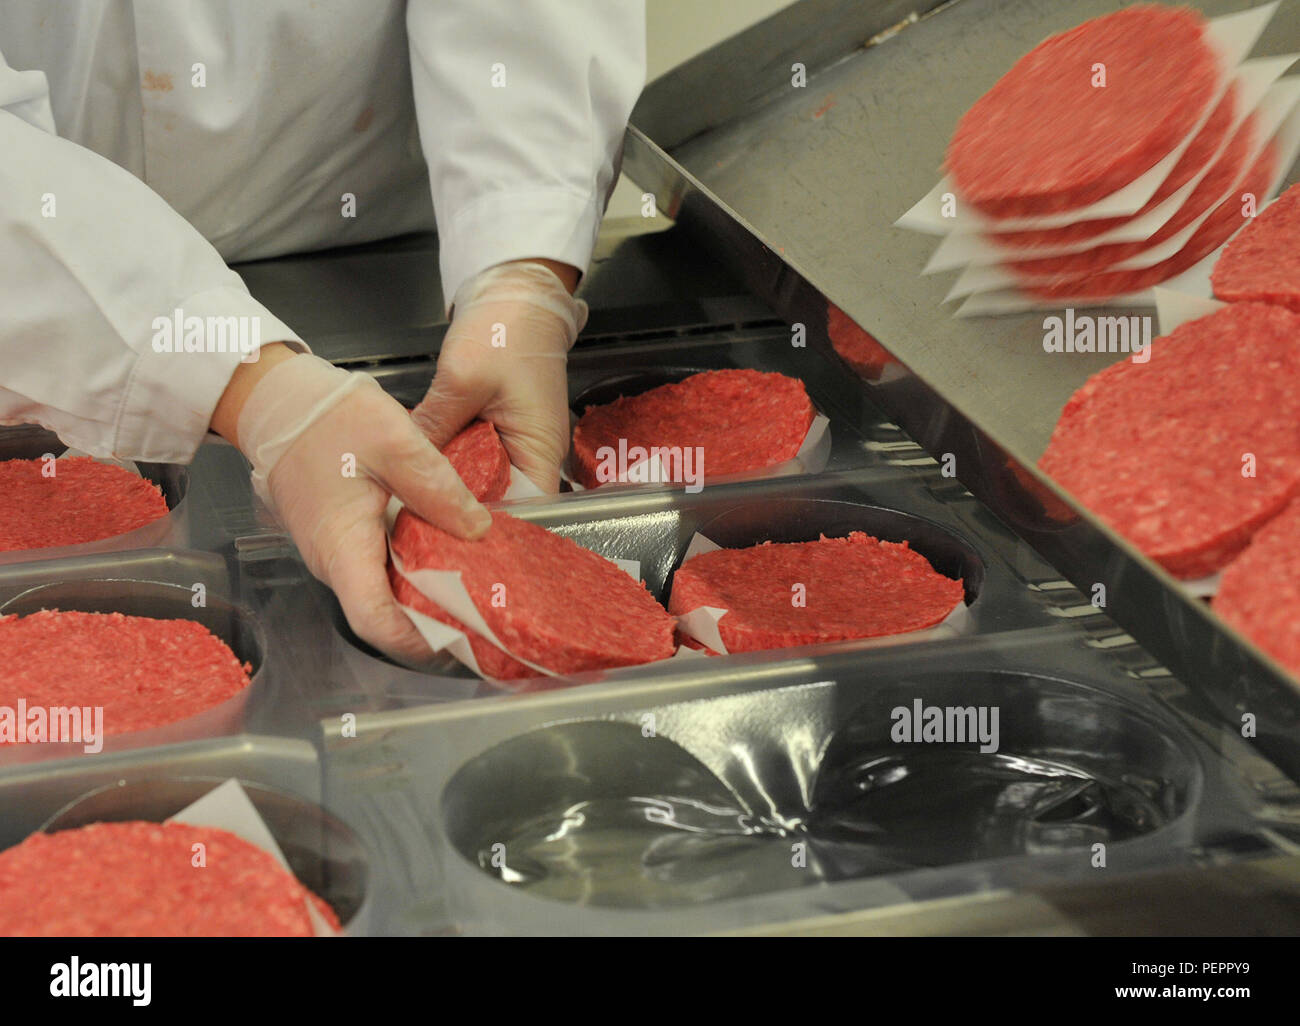 An employee hand packages hamburger patties at the Ramstein Central Meat Processing Plant Jan. 25, 2016, at Ramstein Air Base, Germany. The Ramstein CMPP cuts, packages and ships more than 713,000 pounds of fresh and frozen beef and pork to 35 commissaries and 18 Army and Air Force Exchange Service locations overseas. (U.S. Air Force photo/Airman 1st Class Larissa Greatwood) Stock Photo